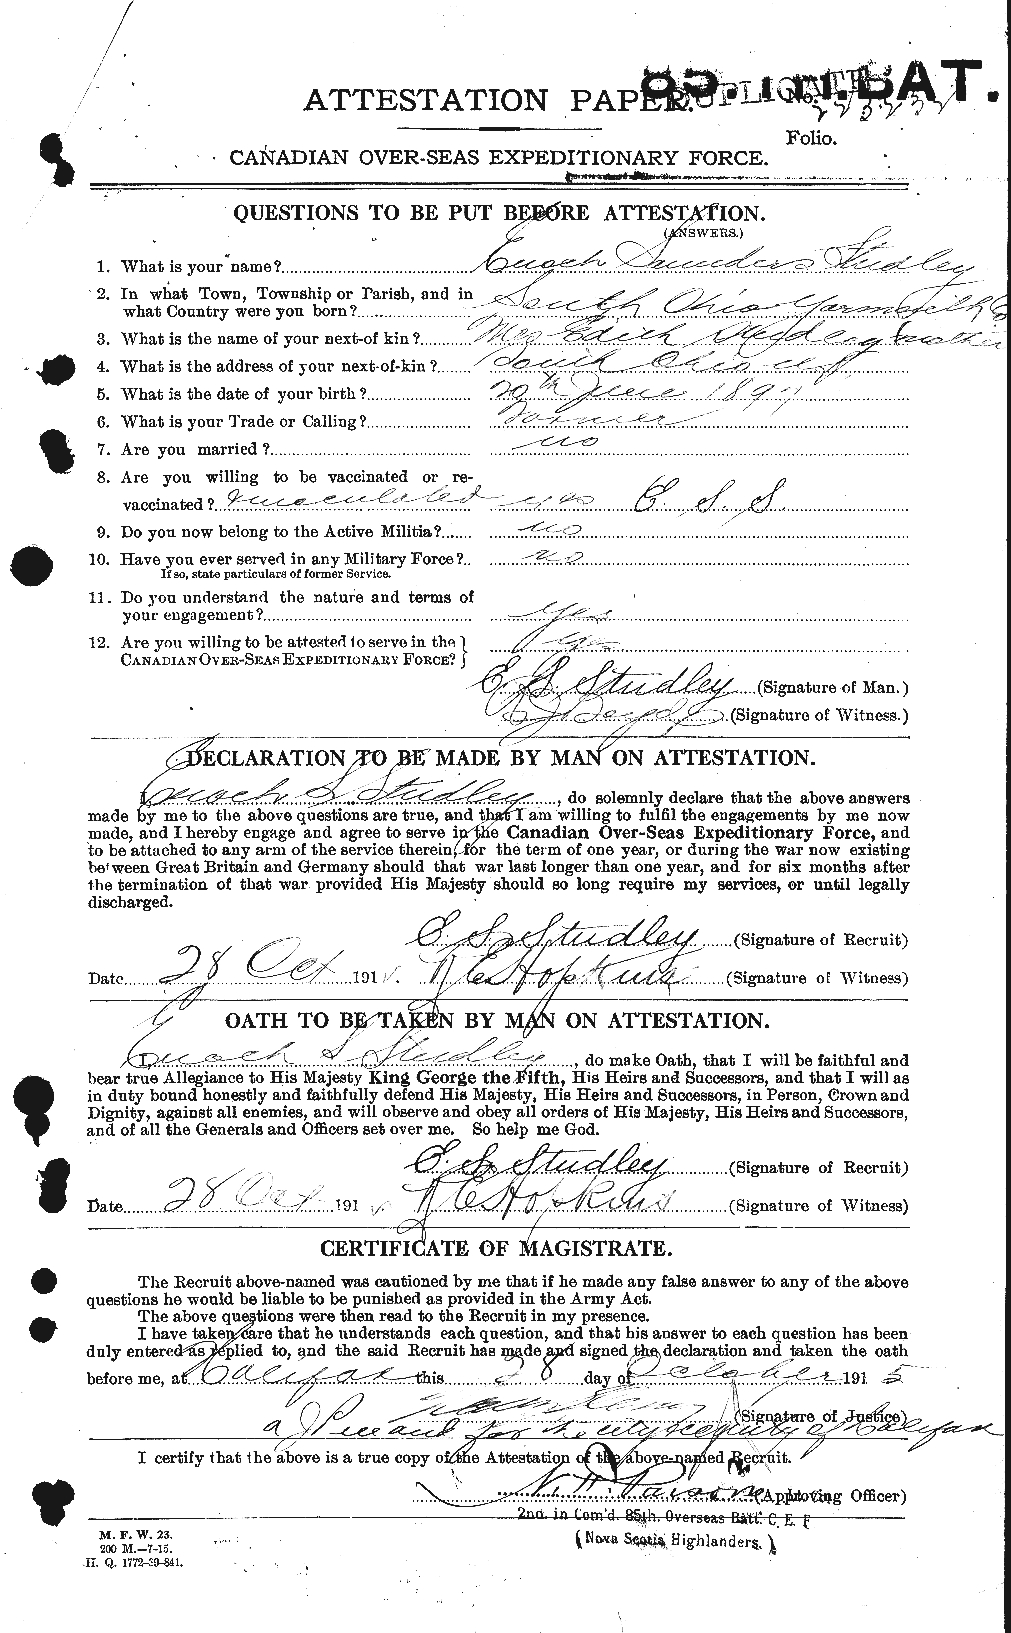 Personnel Records of the First World War - CEF 124216a